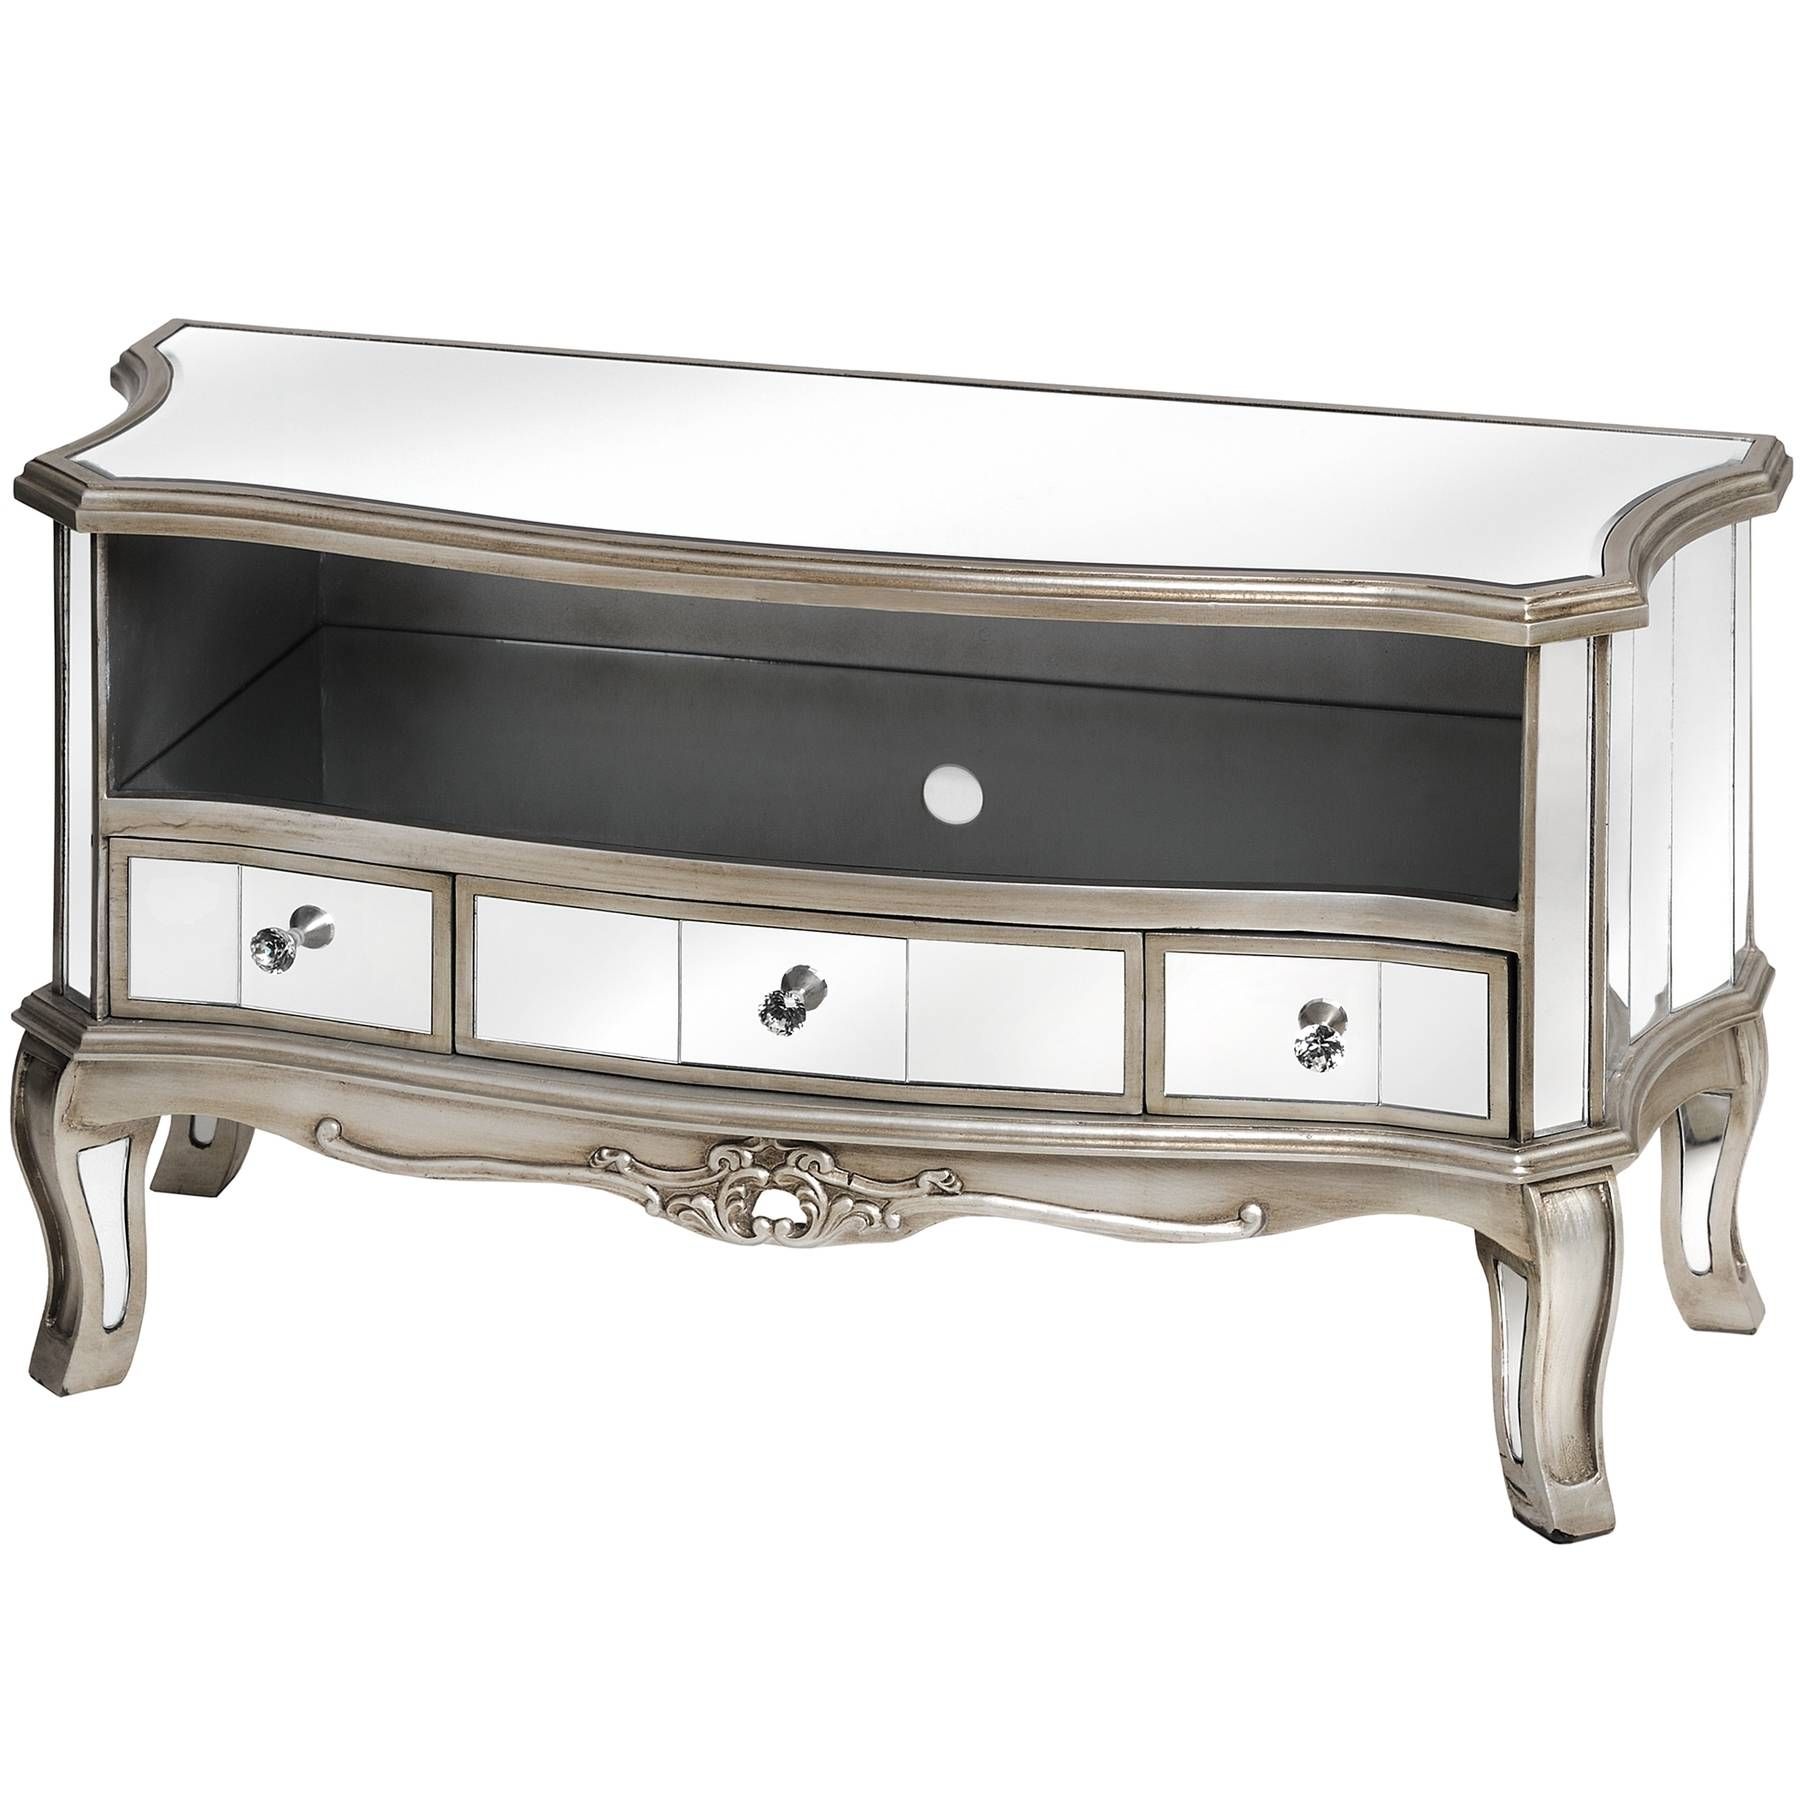 Argente Mirrored Television Cabinet | From Baytree Interiors Inside Mirror Tv Cabinets (View 3 of 15)